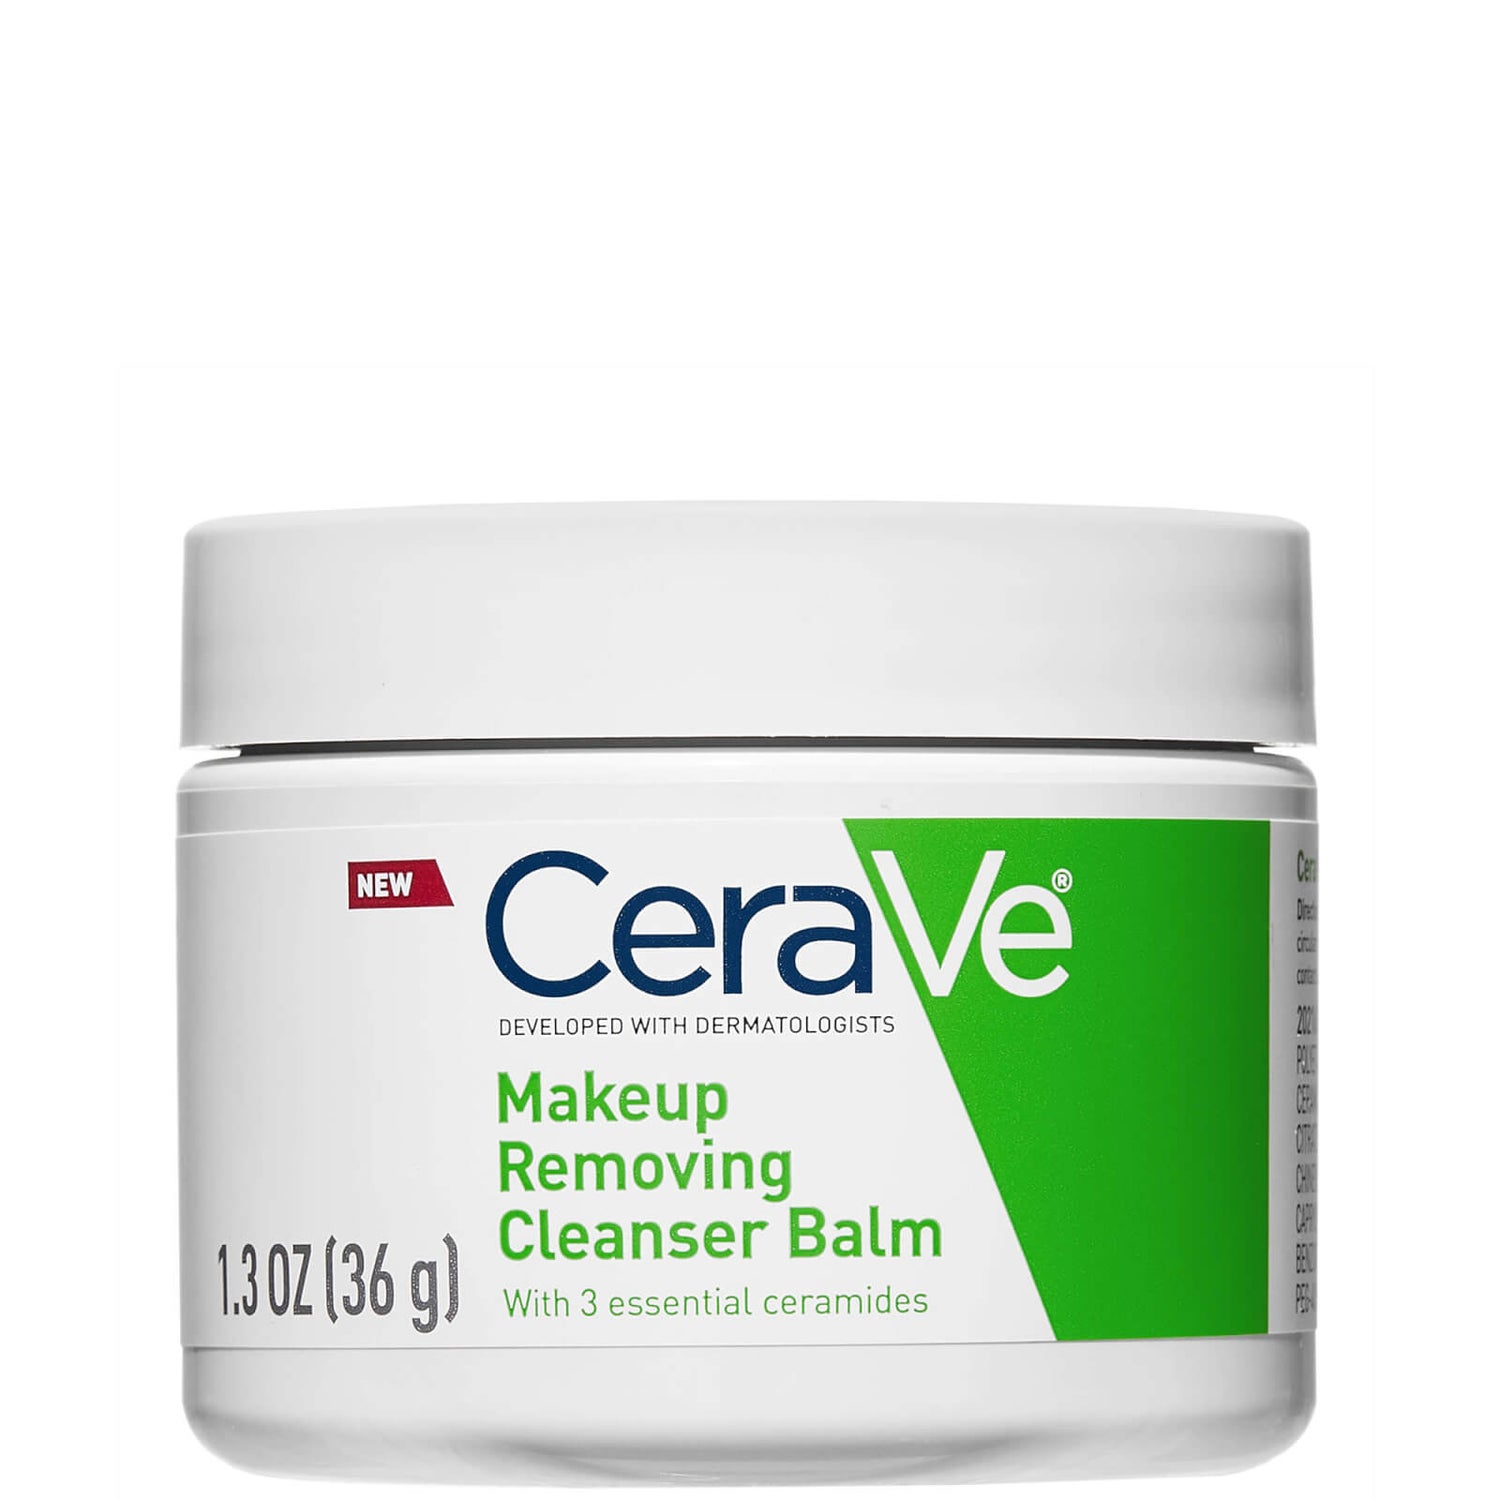 CeraVe Makeup Removing Cleanser Balm 26ml